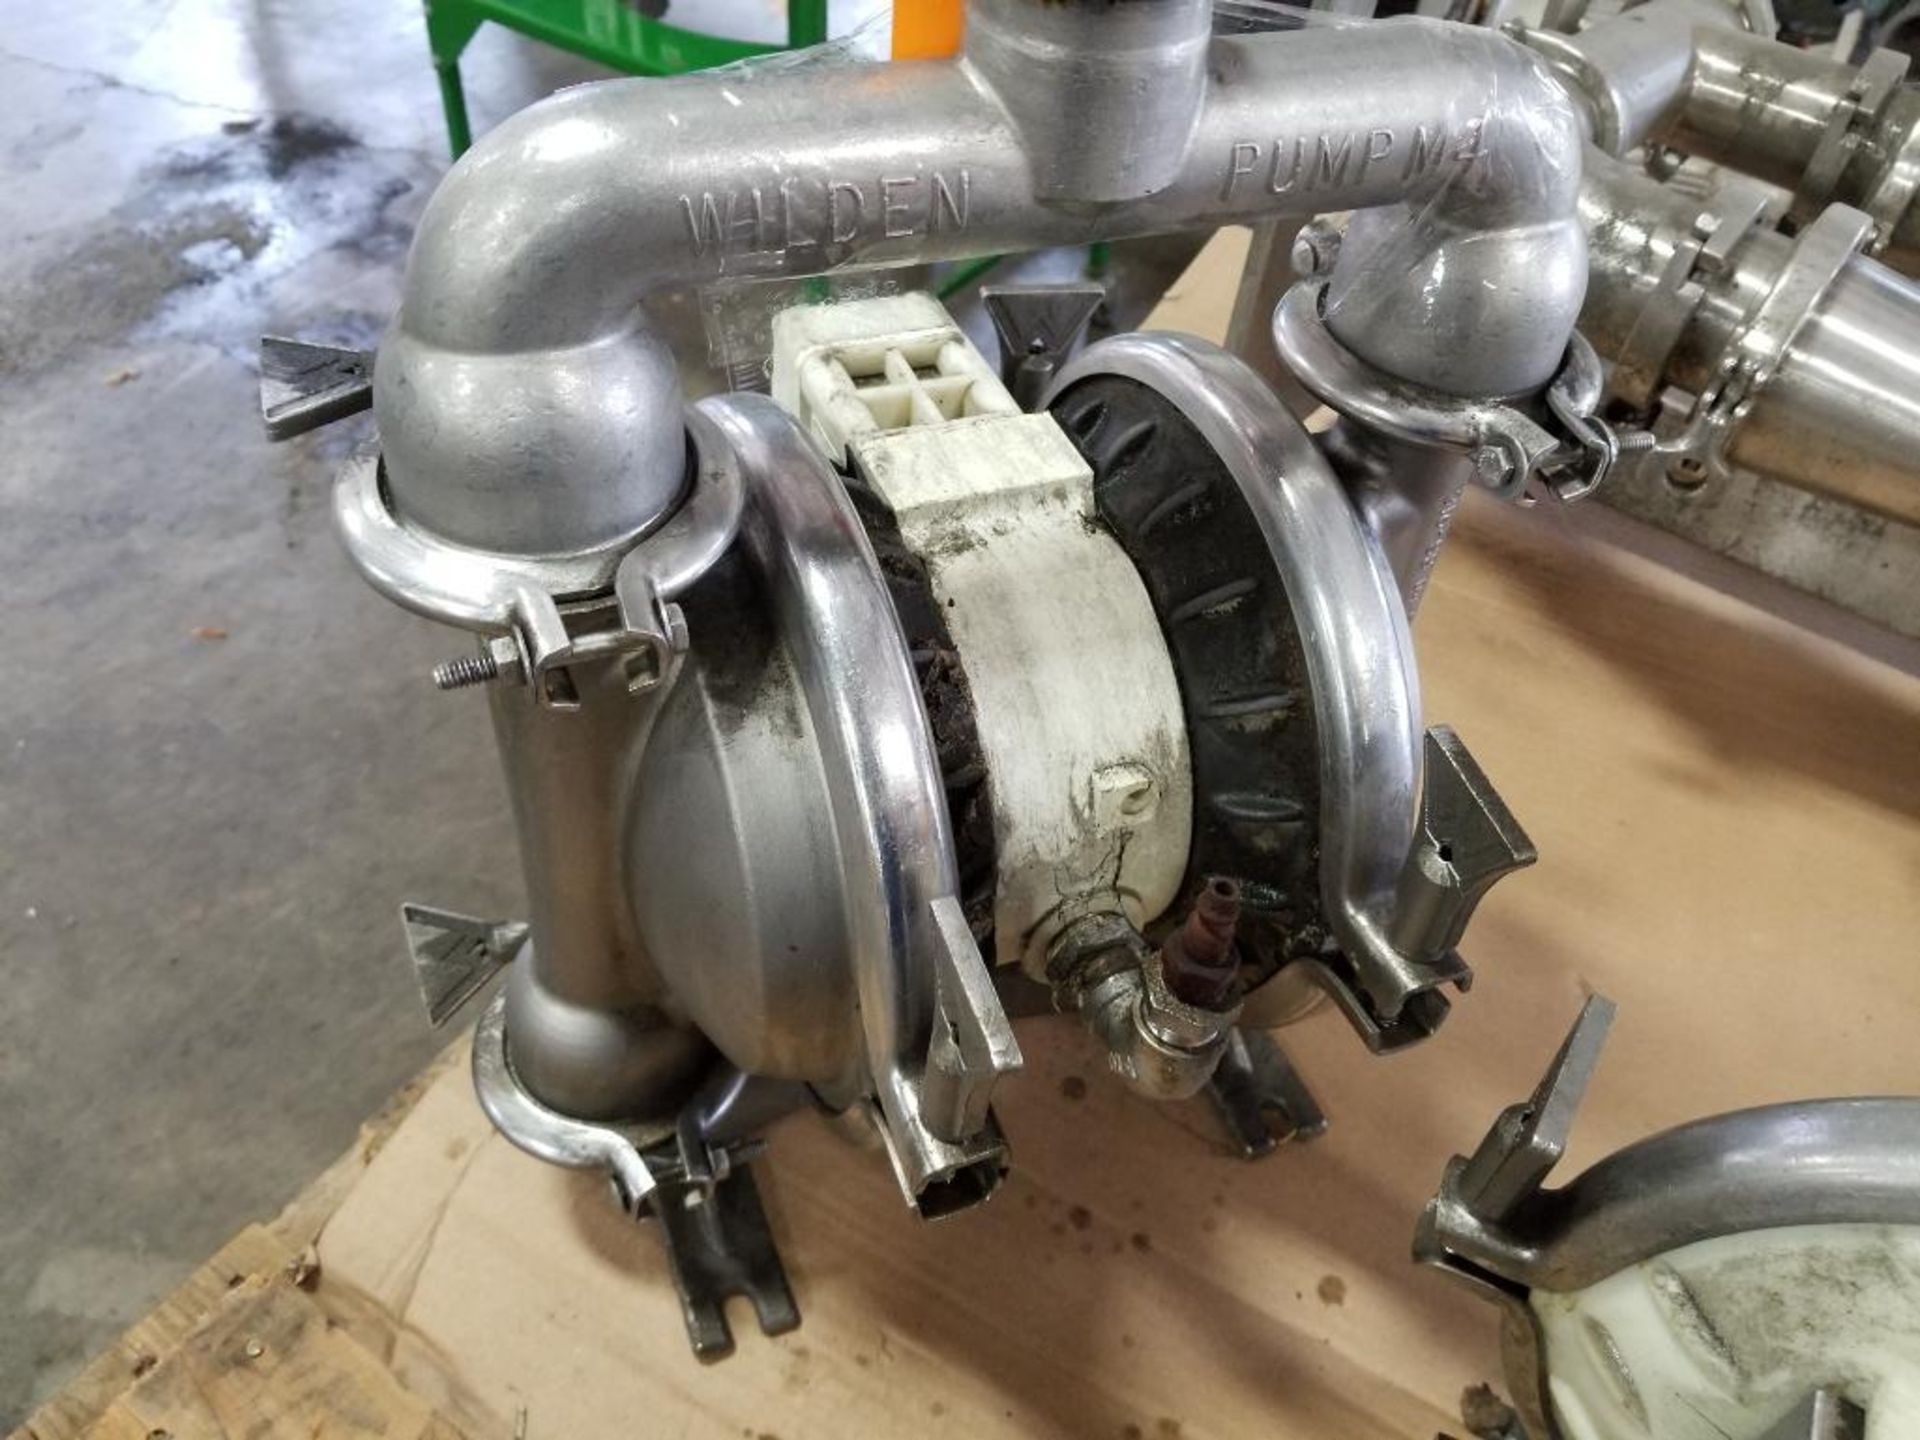 Wilden Stainless steel diaphragm pump. Model 316-SS. - Image 6 of 6